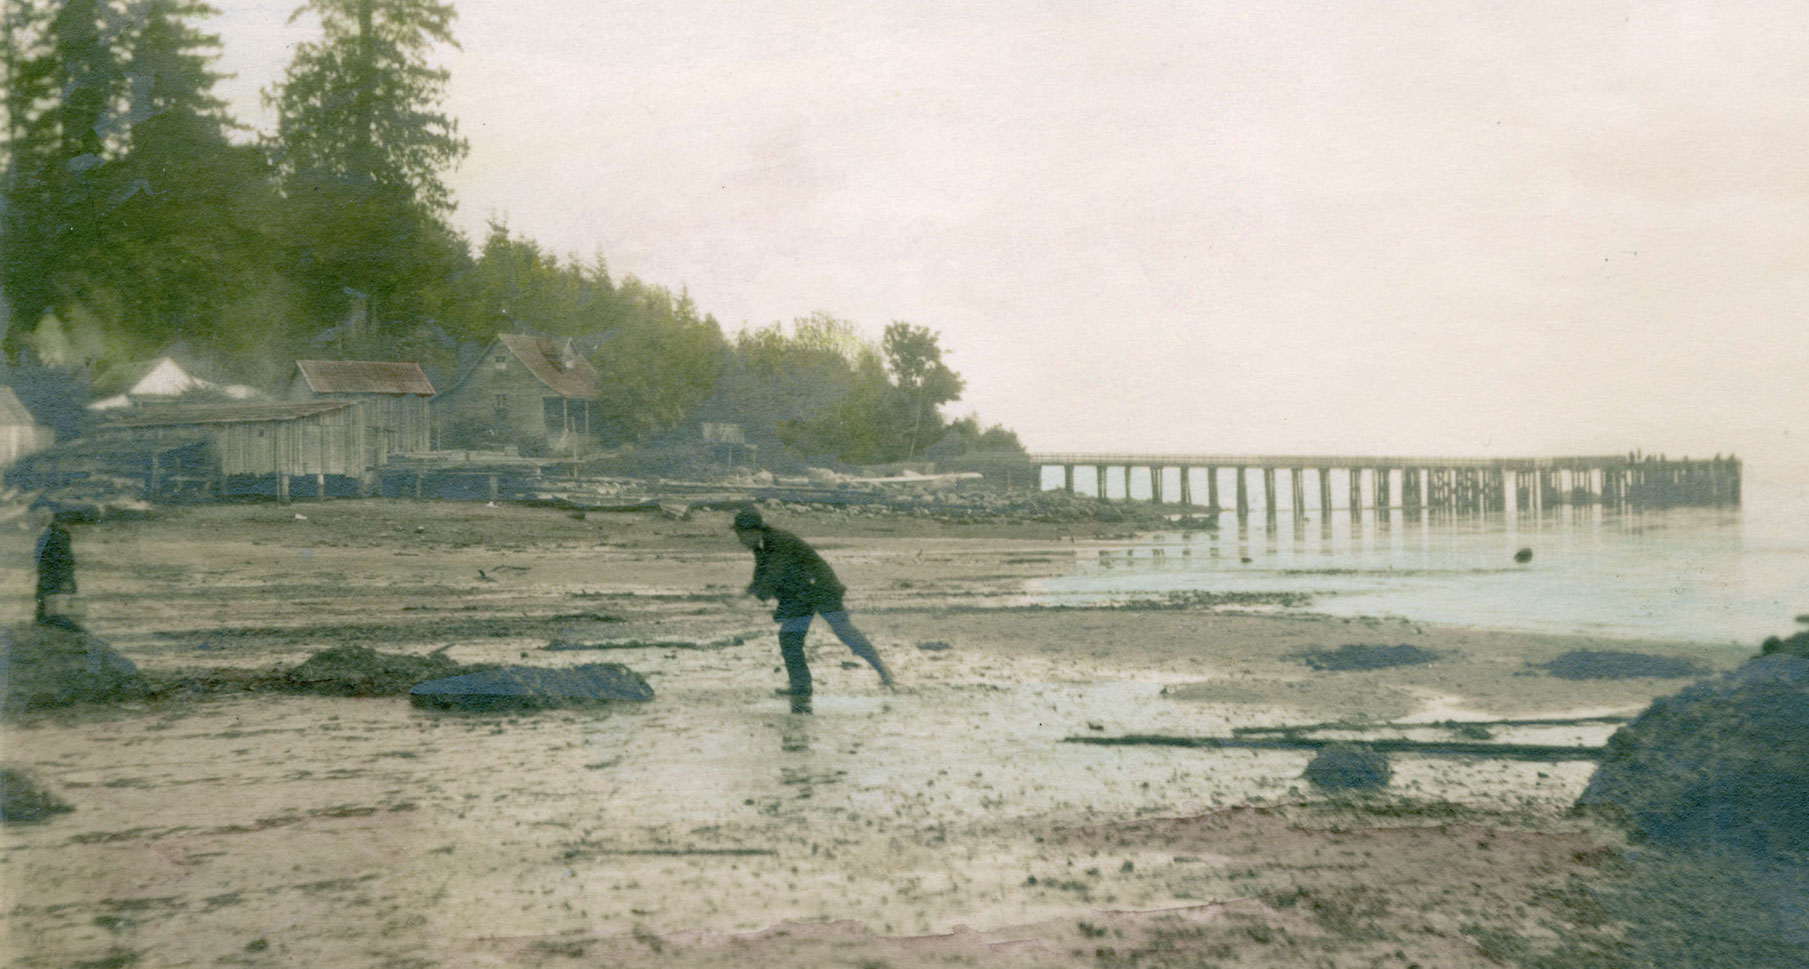 Two figures on the beach at low tide in front of the English Bay Cannery.